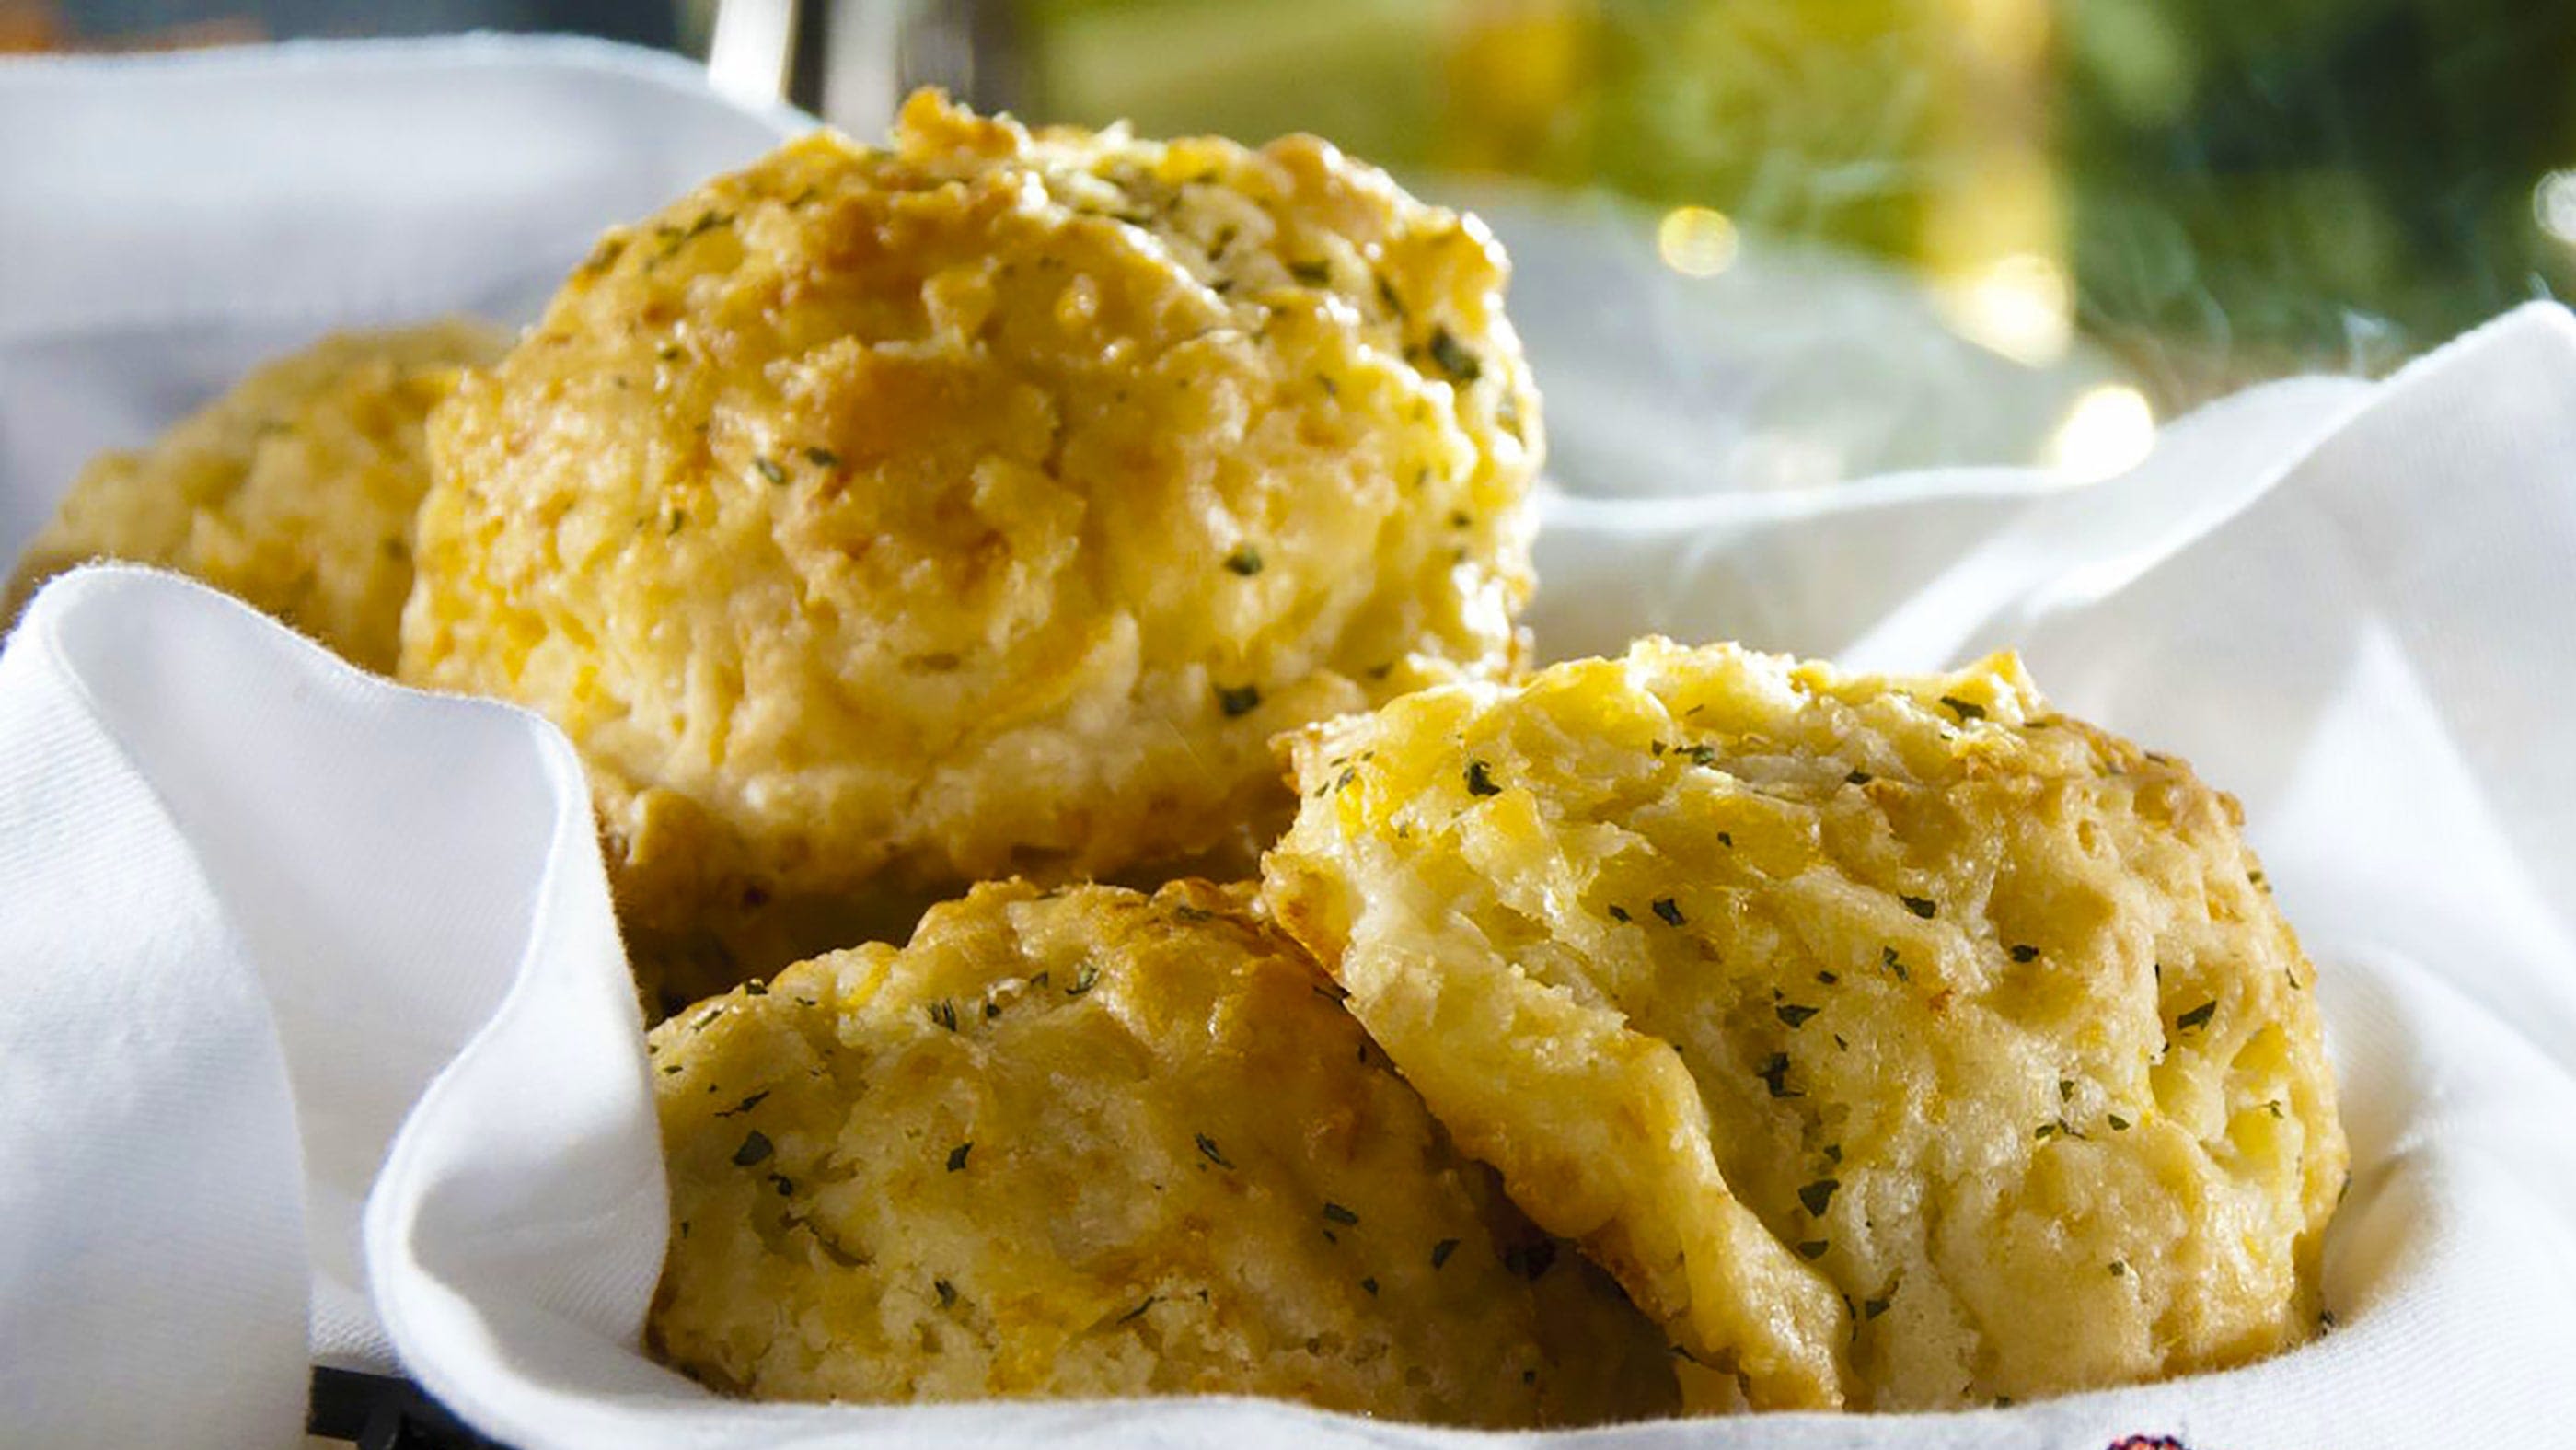 Red Lobster cheddar bay biscuits still available in stores amid location closures, bankruptcy